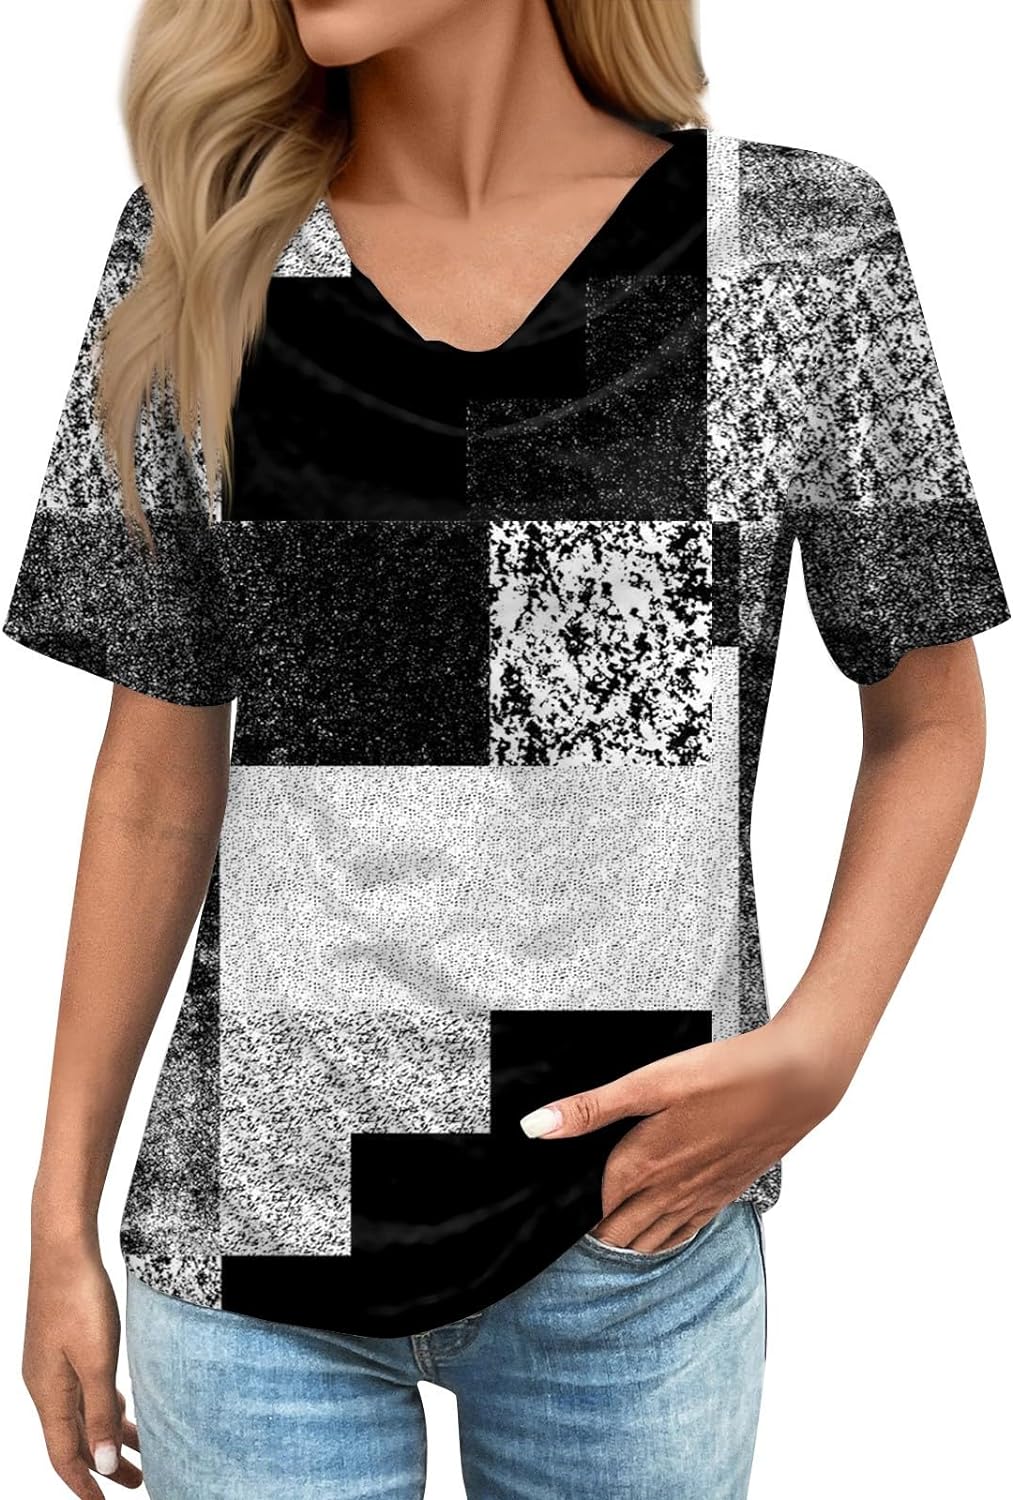 Women’s Fashion Casual Neck Short Sleeve Loose Print T-Shirt Summer Tops Loose Fit Blouse